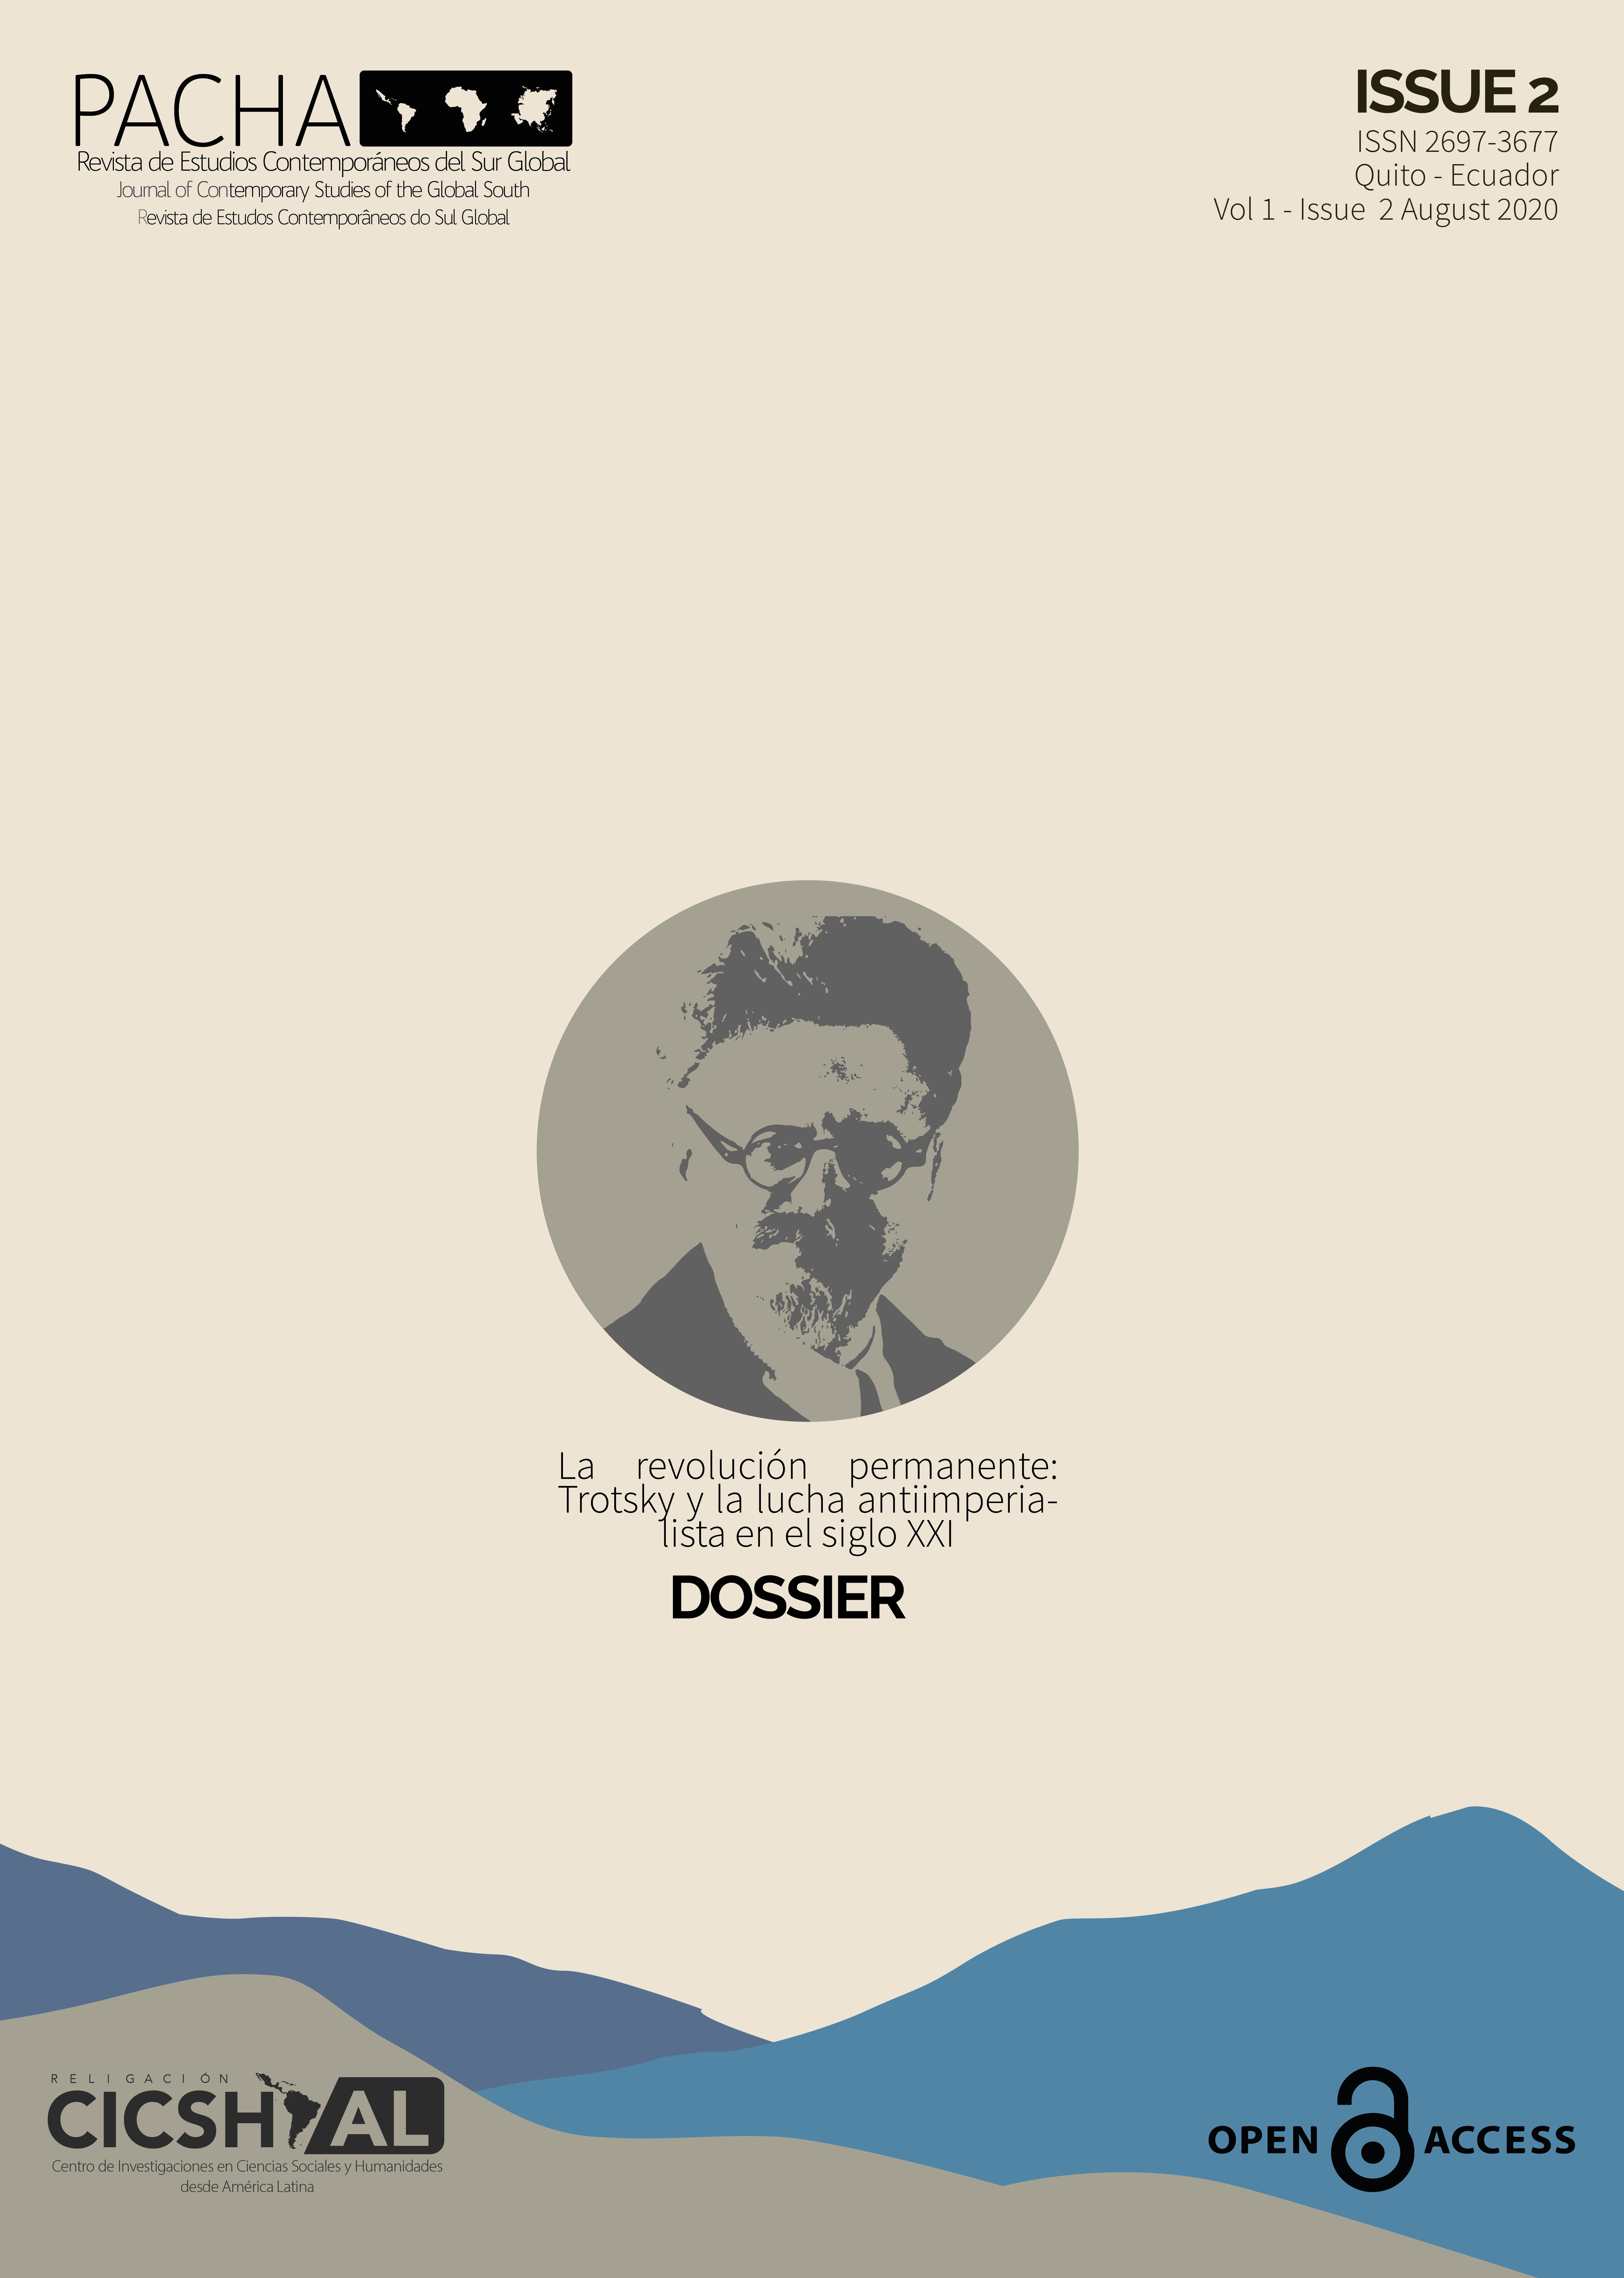 Dossier. The permanent revolution: Trotsky and the anti-imperialist struggle in the 21st century